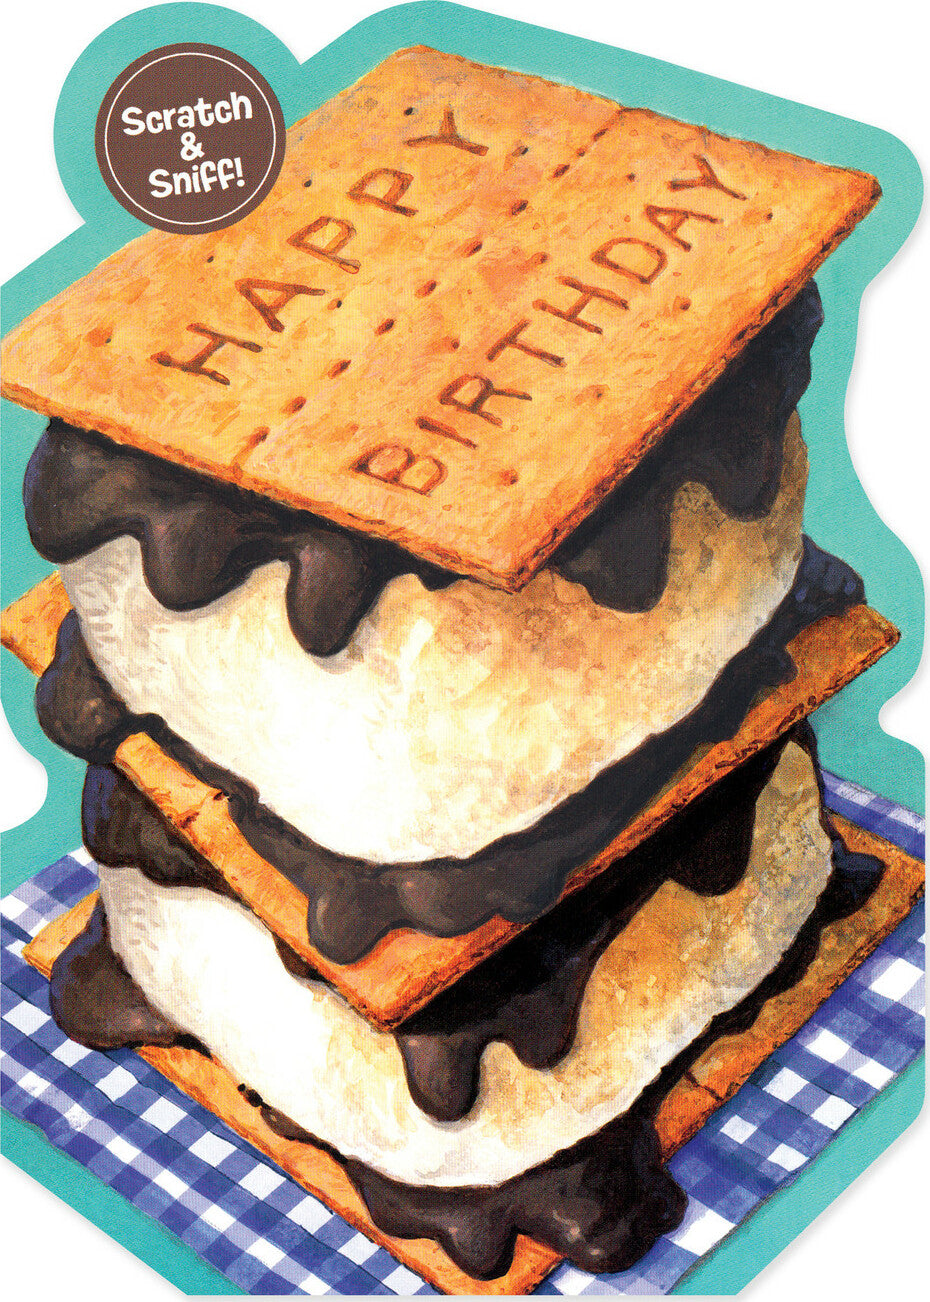 S'more Scratch & Sniff Birthday Card